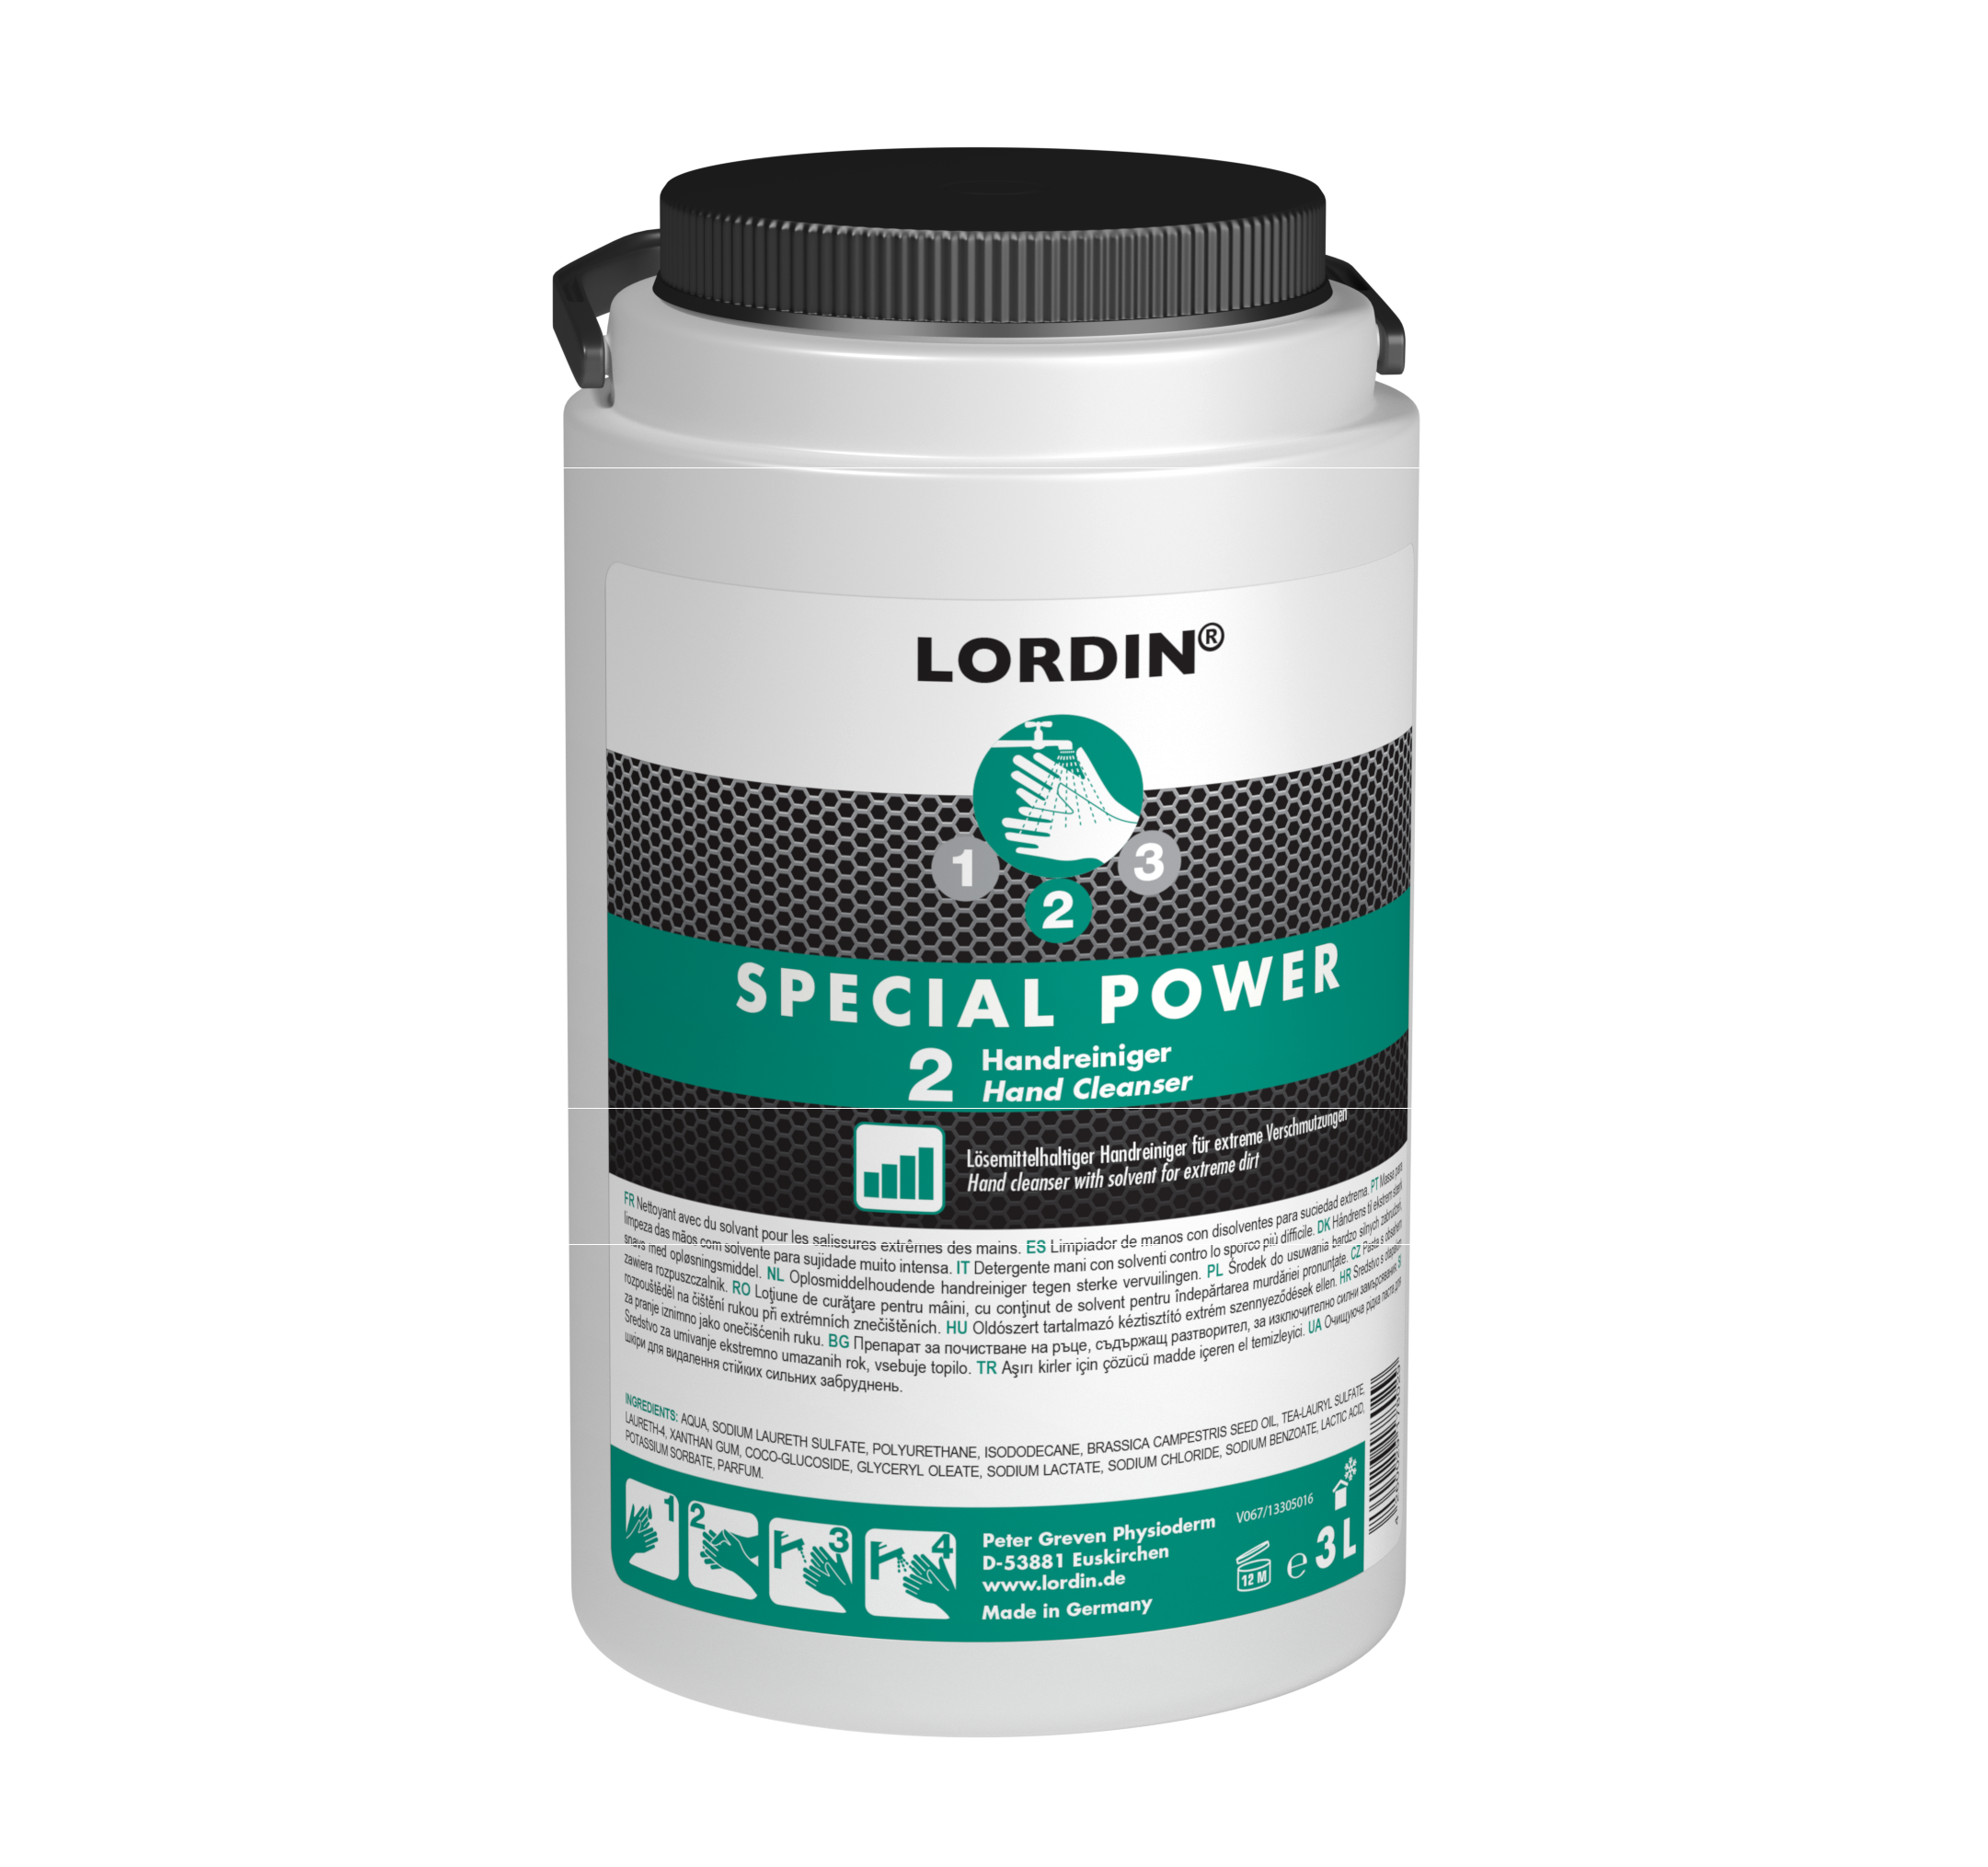 LORDIN SPECIAL POWER HAND CLEANSER 3L - PGP